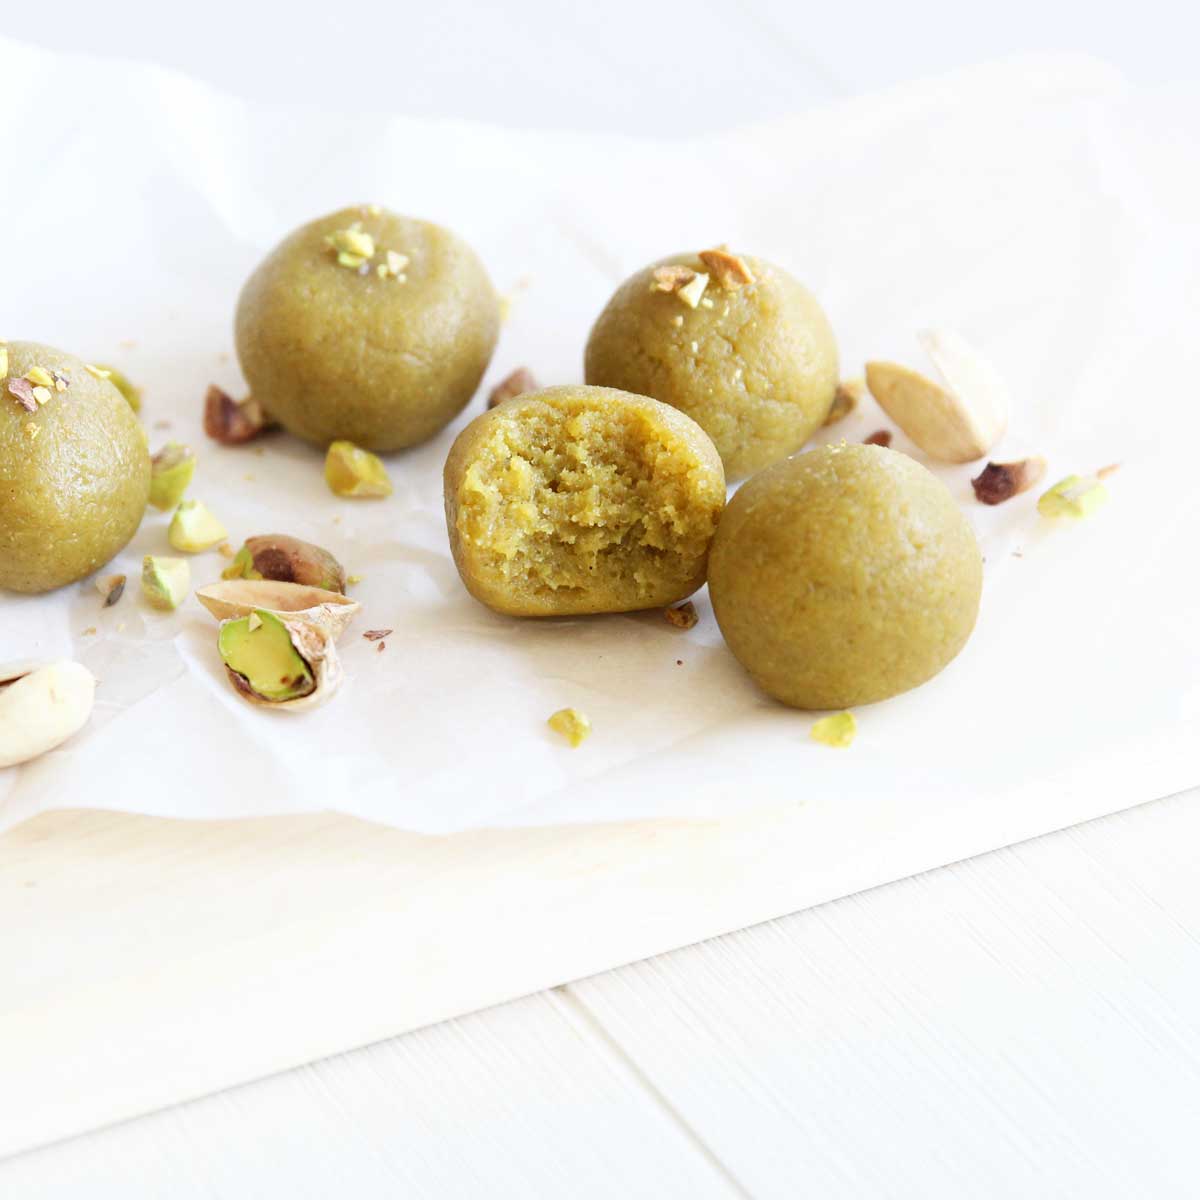 Keto Pistachio Cheesecake Protein Balls (Low Carb Energy Bites made with Collagen Peptides) - Nutella Protein Bars